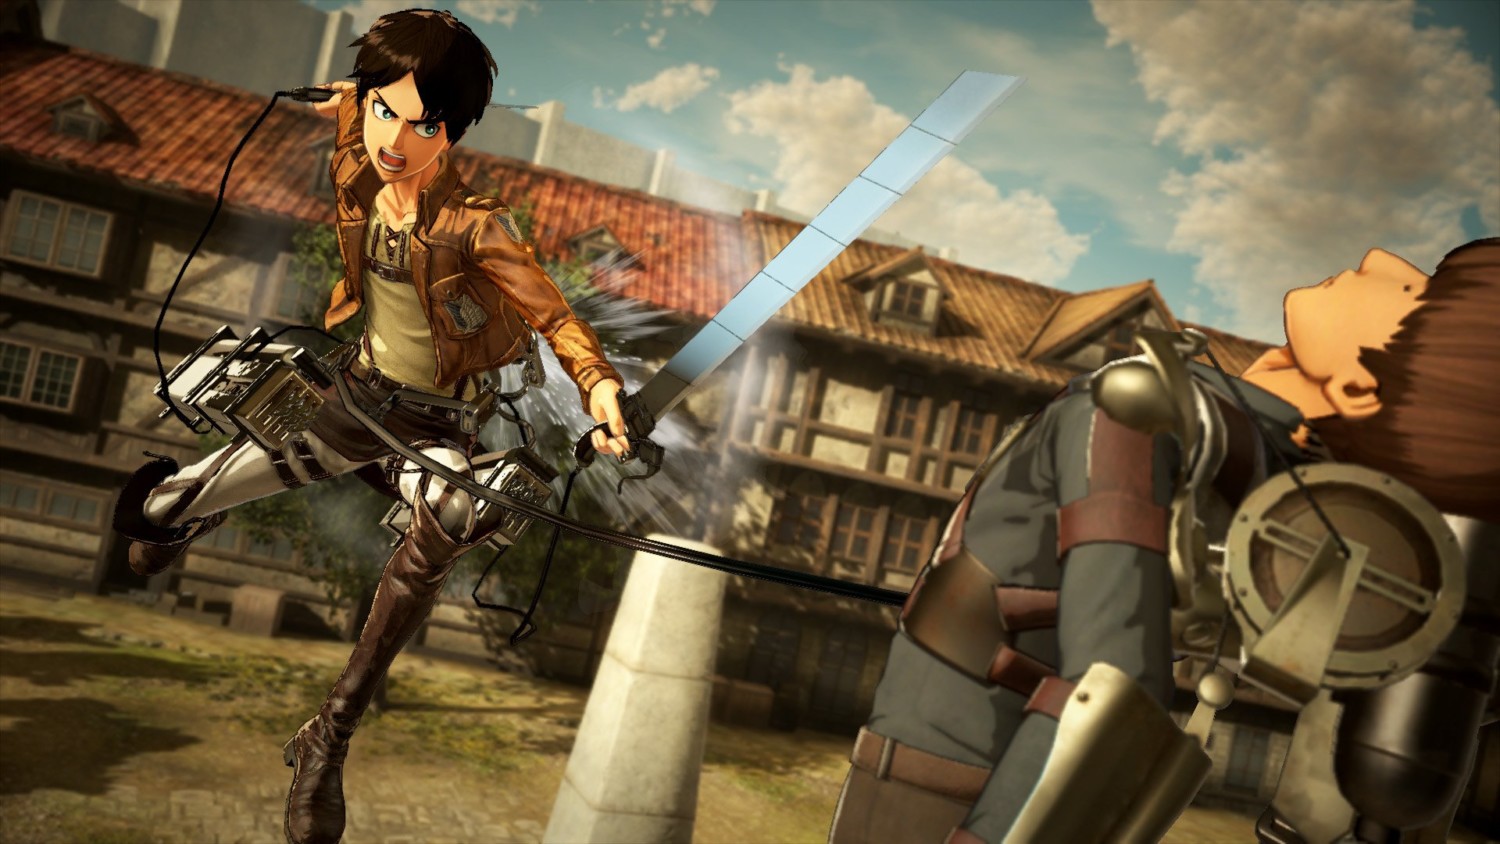 Attack on Titan 2/ A.O.T.2 [Online Game Code] 